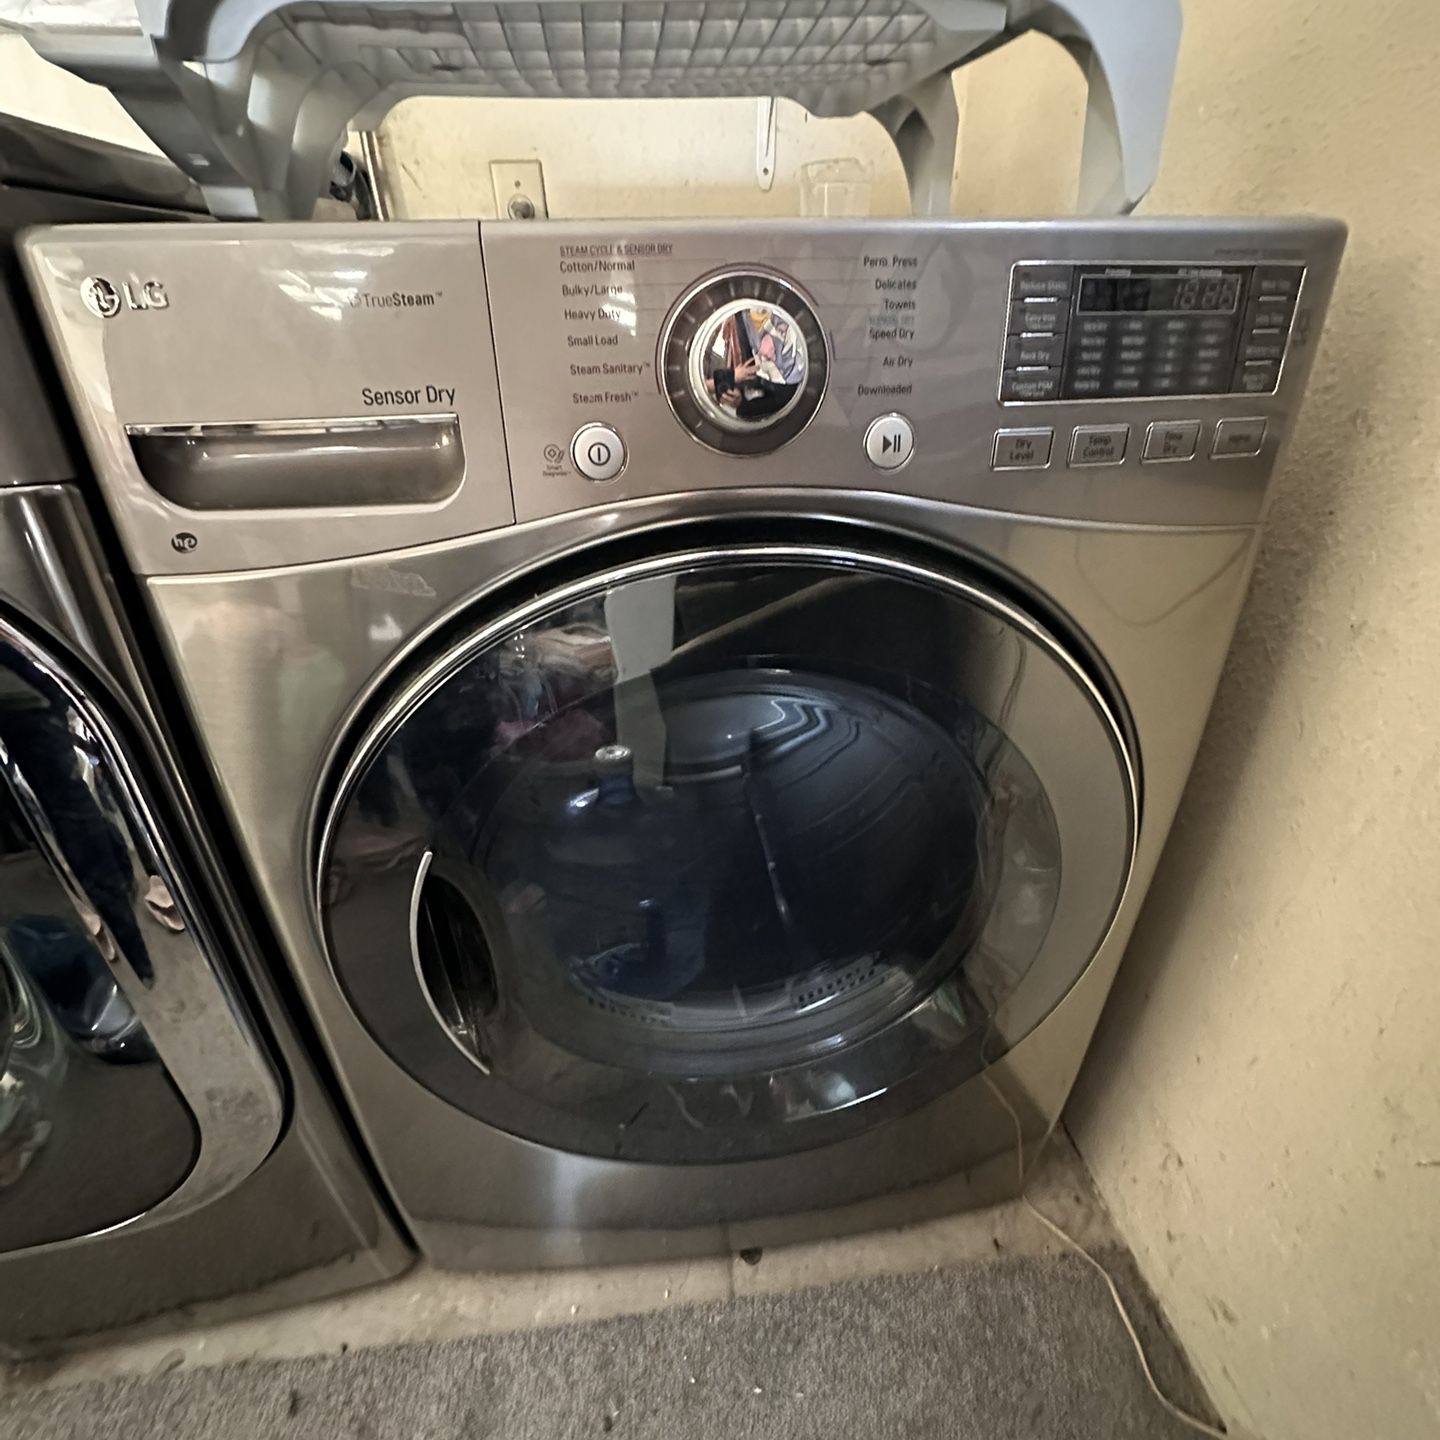 Large Capacity, Lg Washer And Dryer